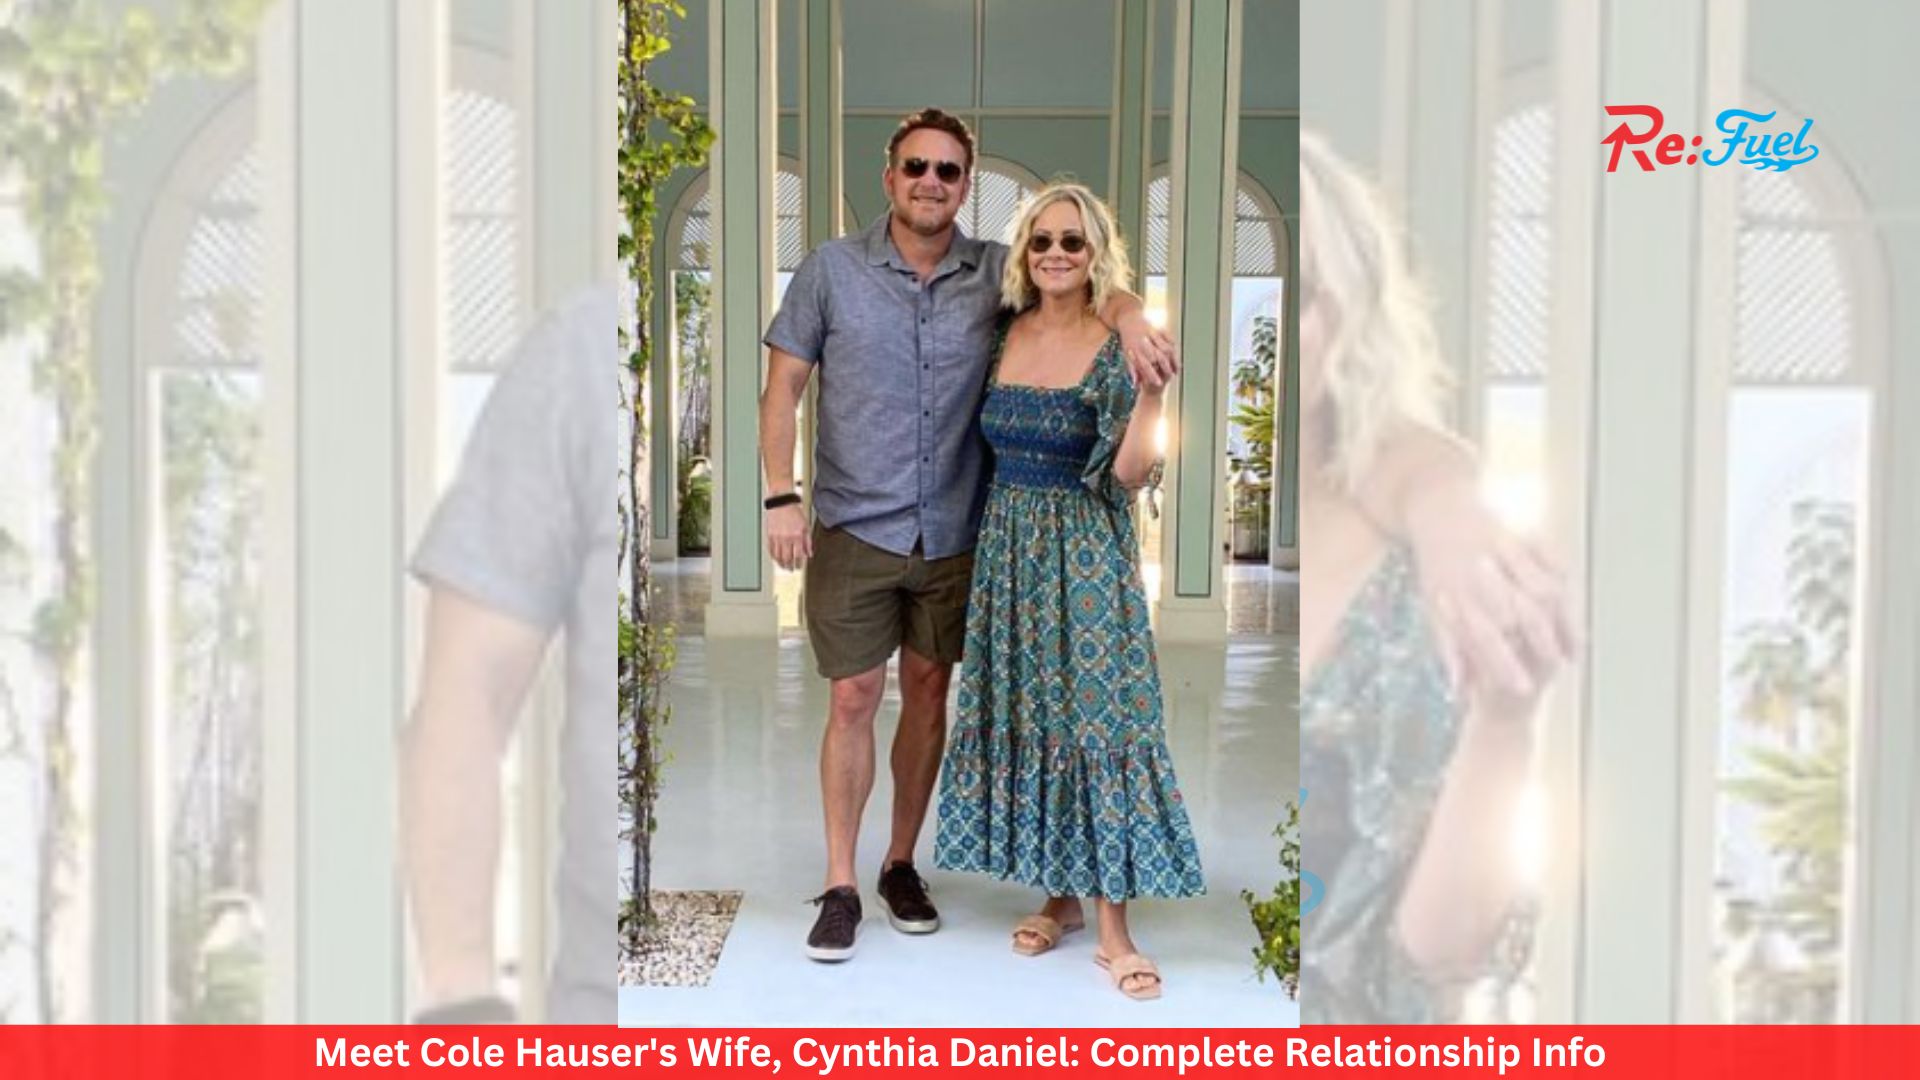 Meet Cole Hauser's Wife, Cynthia Daniel: Complete Relationship Info